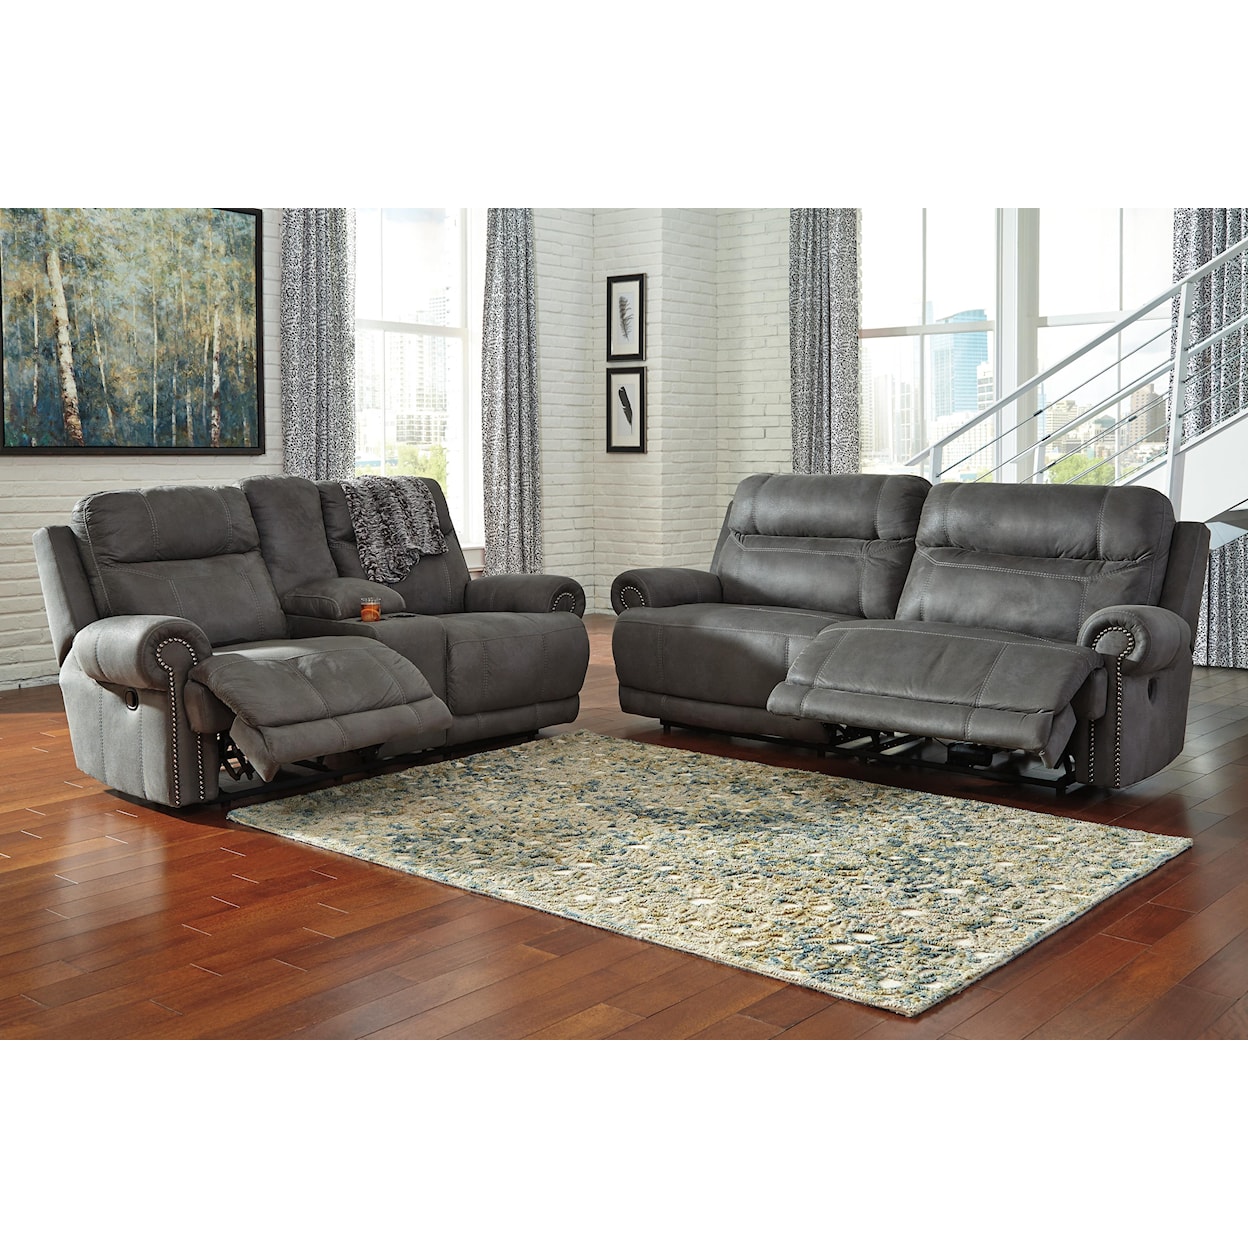 Signature Design by Ashley Austere Reclining Living Room Group